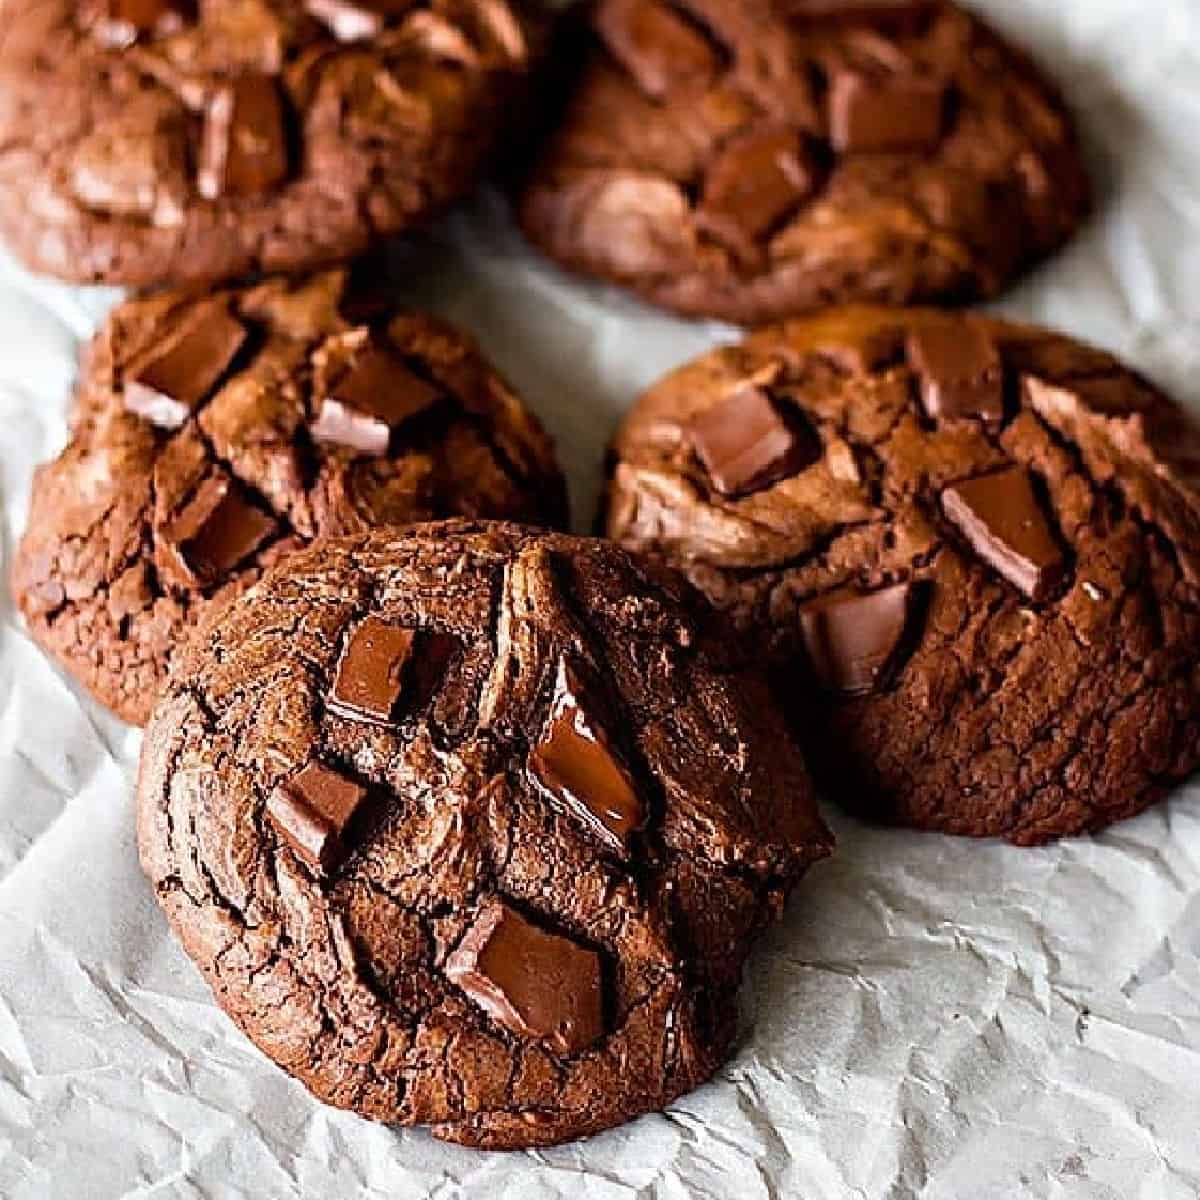 Ready in 30 minutes, these chewy double chocolate cookies will cure all your chocolate cravings in one bite. These double chocolate cookies are crispy on the edges and very chewy on the inside with big chocolate chunks in every bite!
